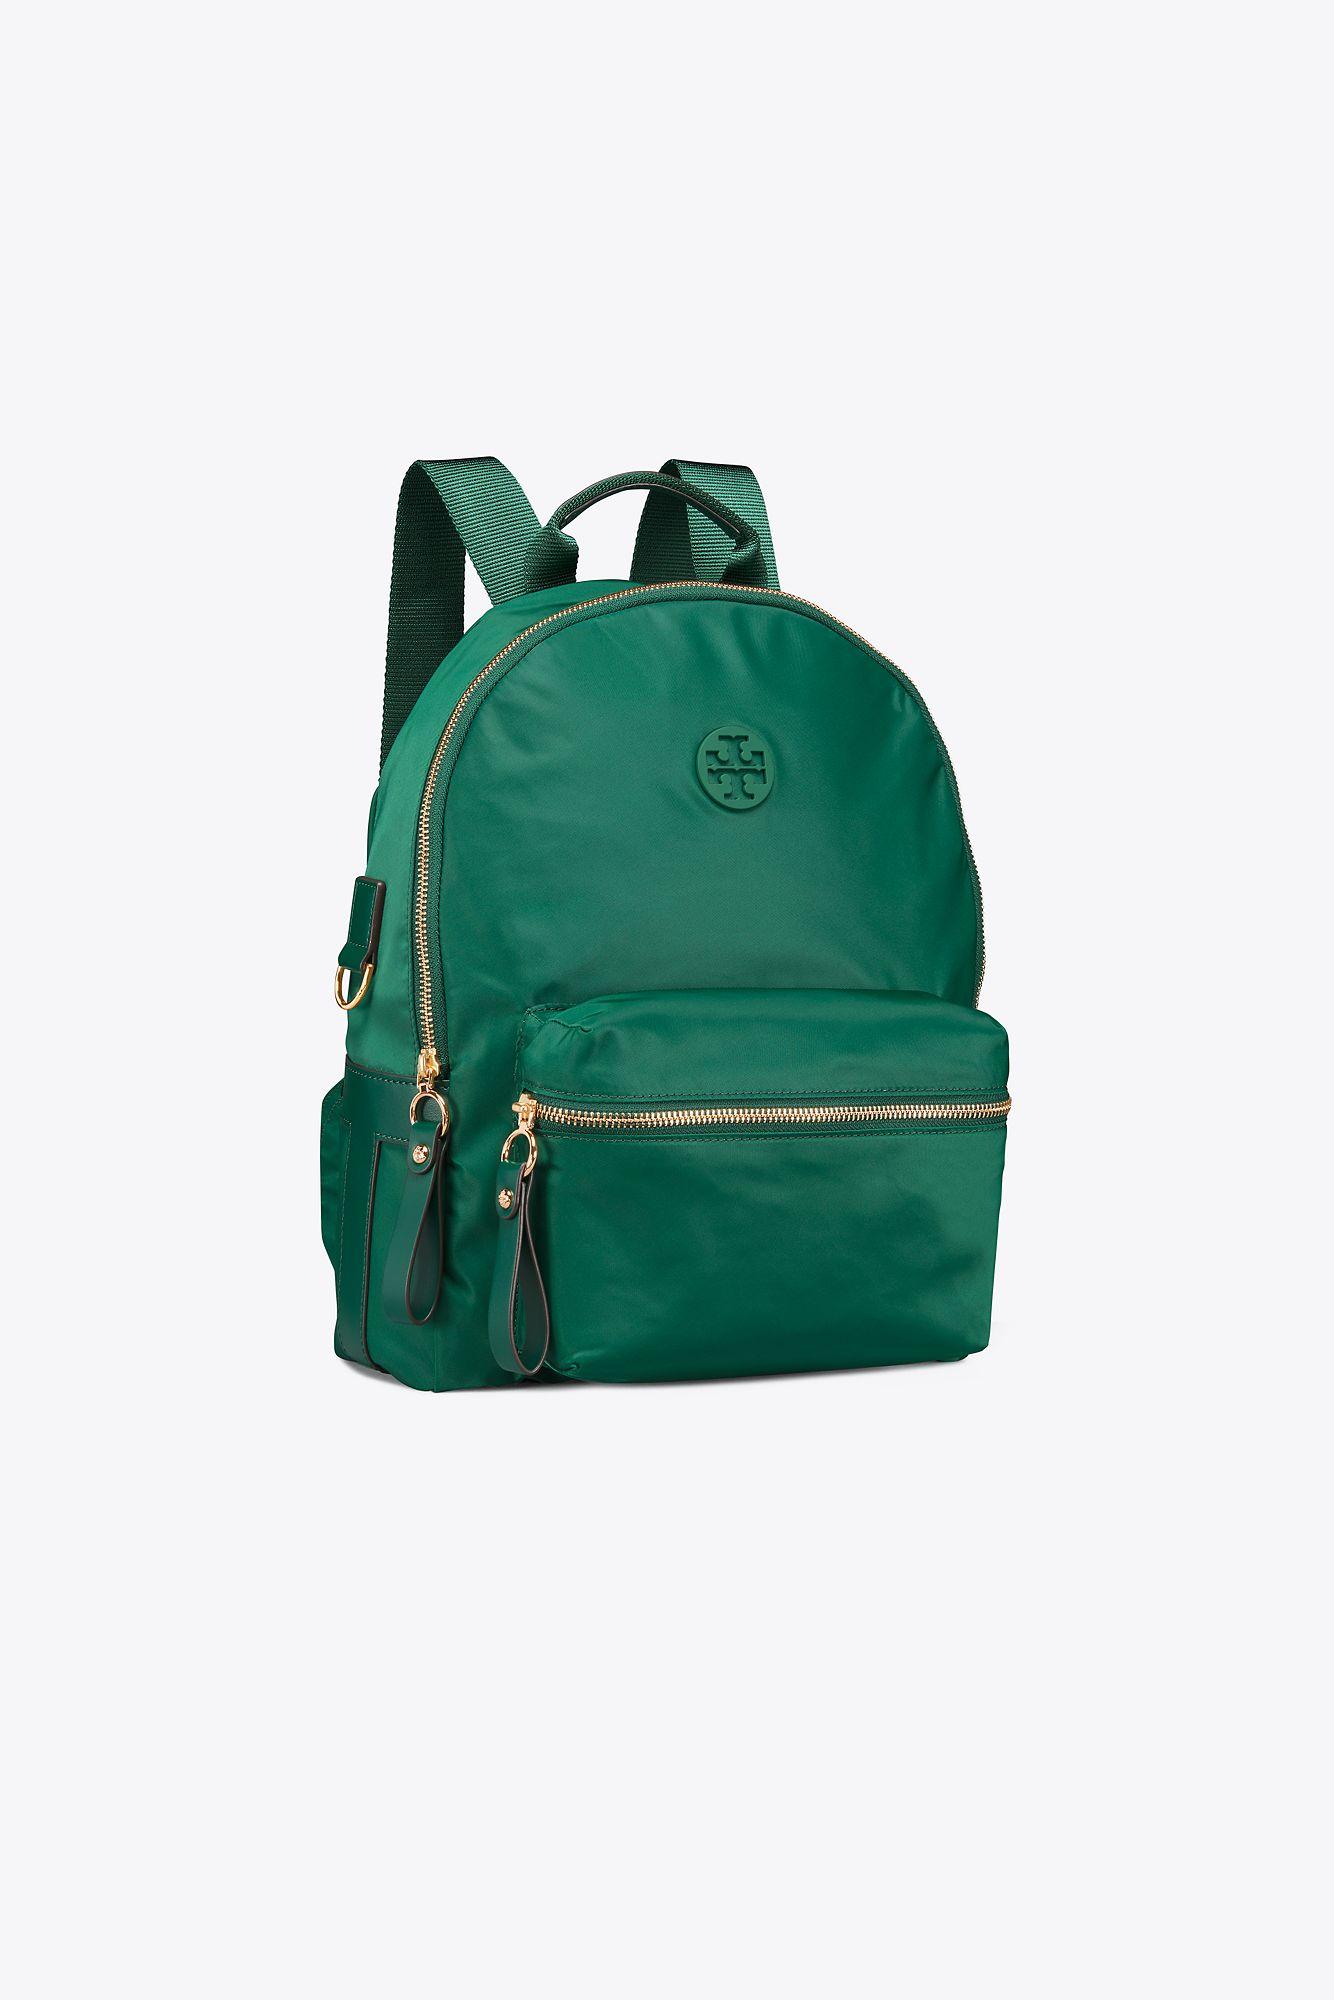 Tory Burch Synthetic Tilda Zip Backpack in Green | Lyst